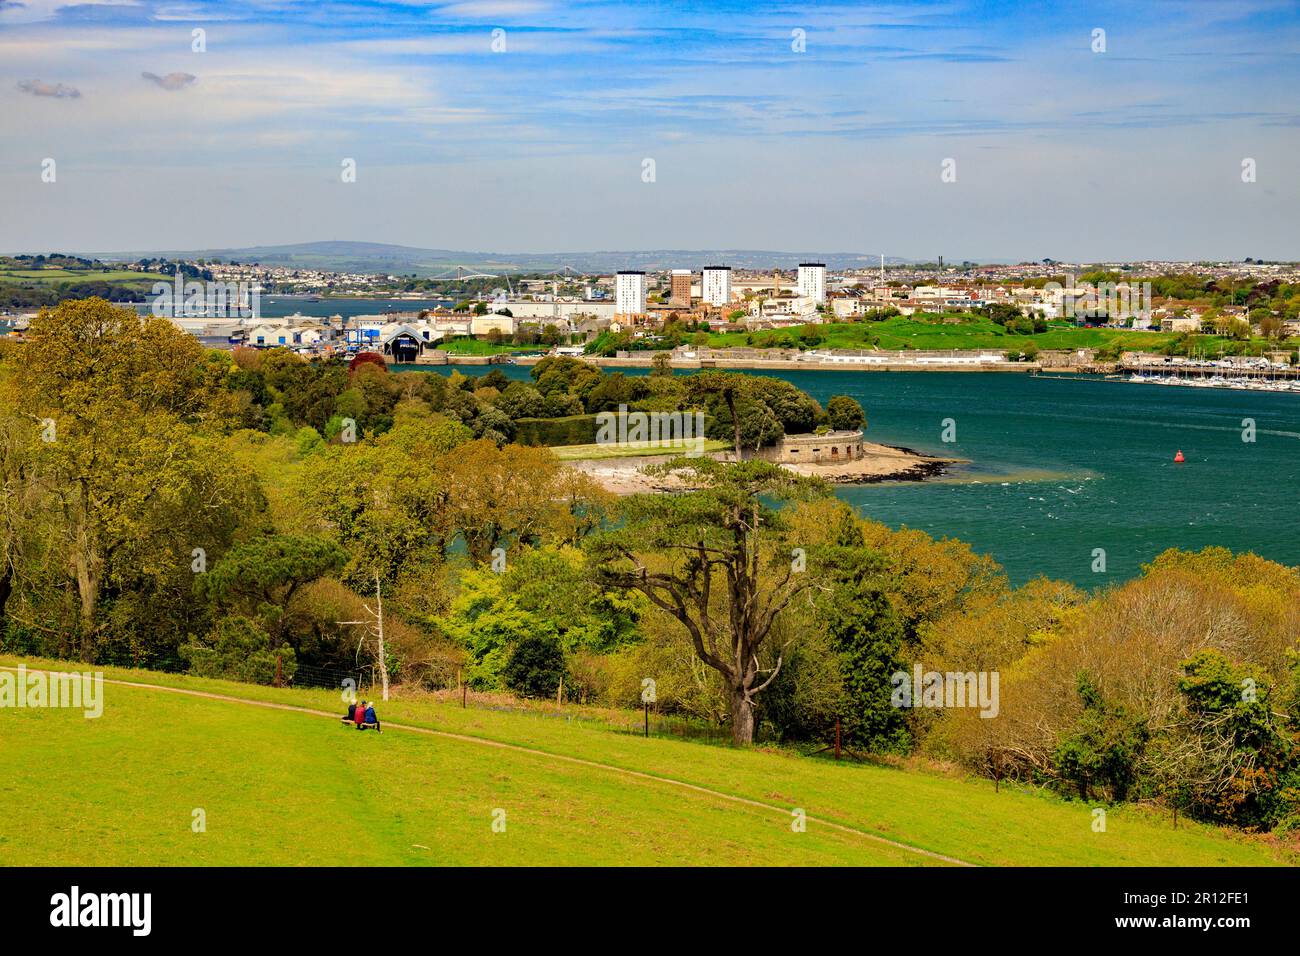 Looking across the River Tamar towards the Plymouth waterfront from Mount Edgcumbe Country Park, Cornwall, England, UK Stock Photo